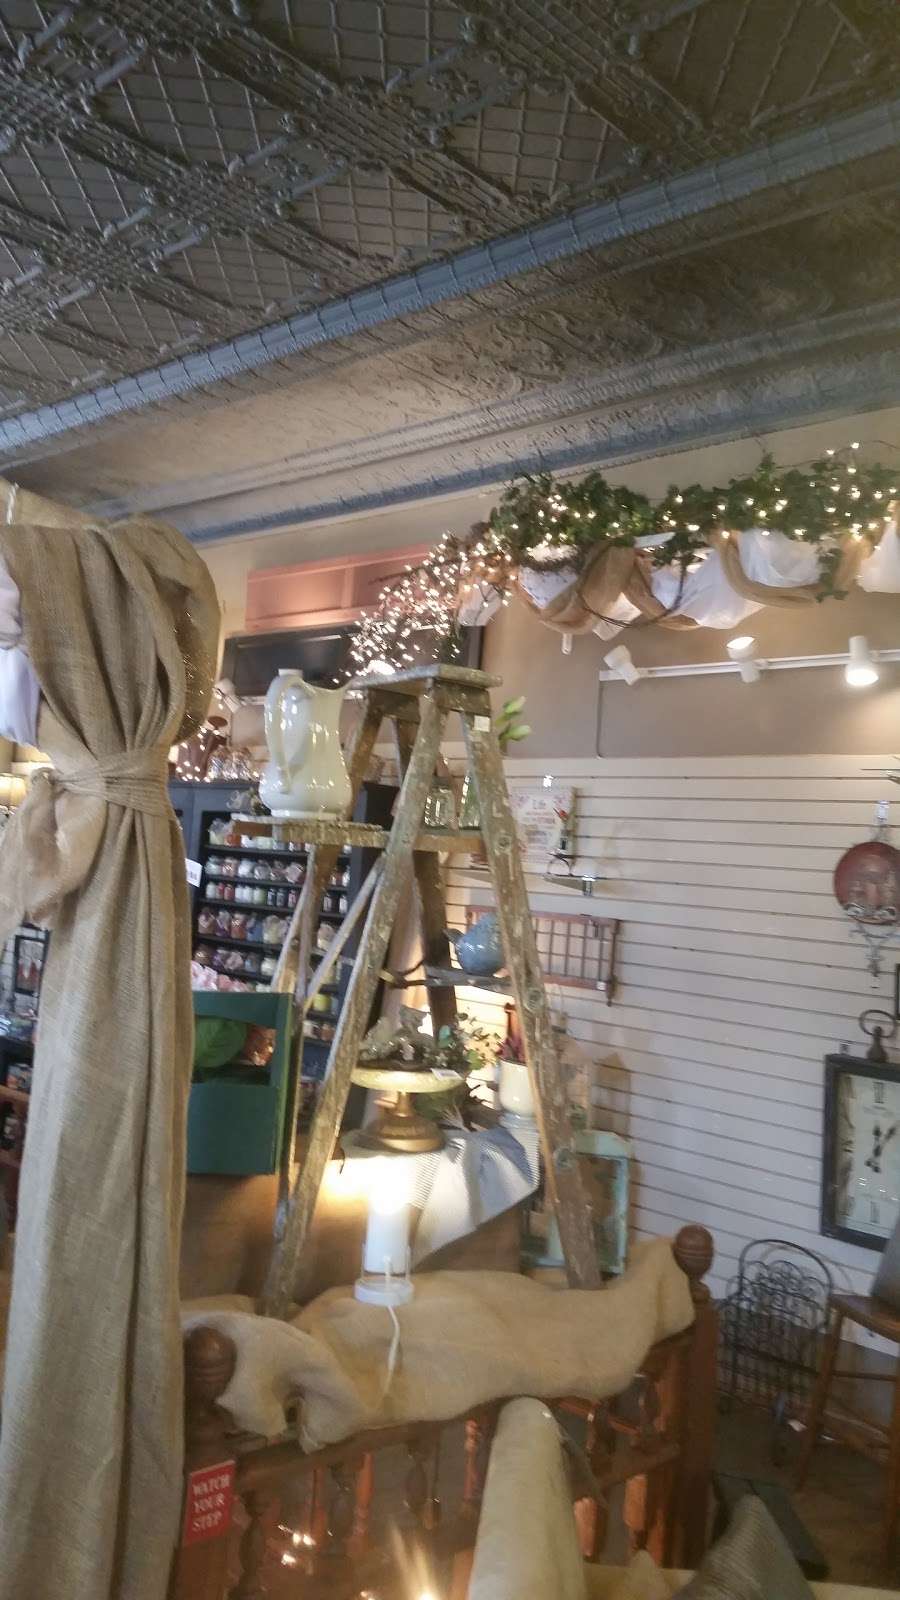 Kimberly Ann Home Decorating Boutique | 67 Main St, Oswego, IL 60543 | Phone: (630) 636-7441